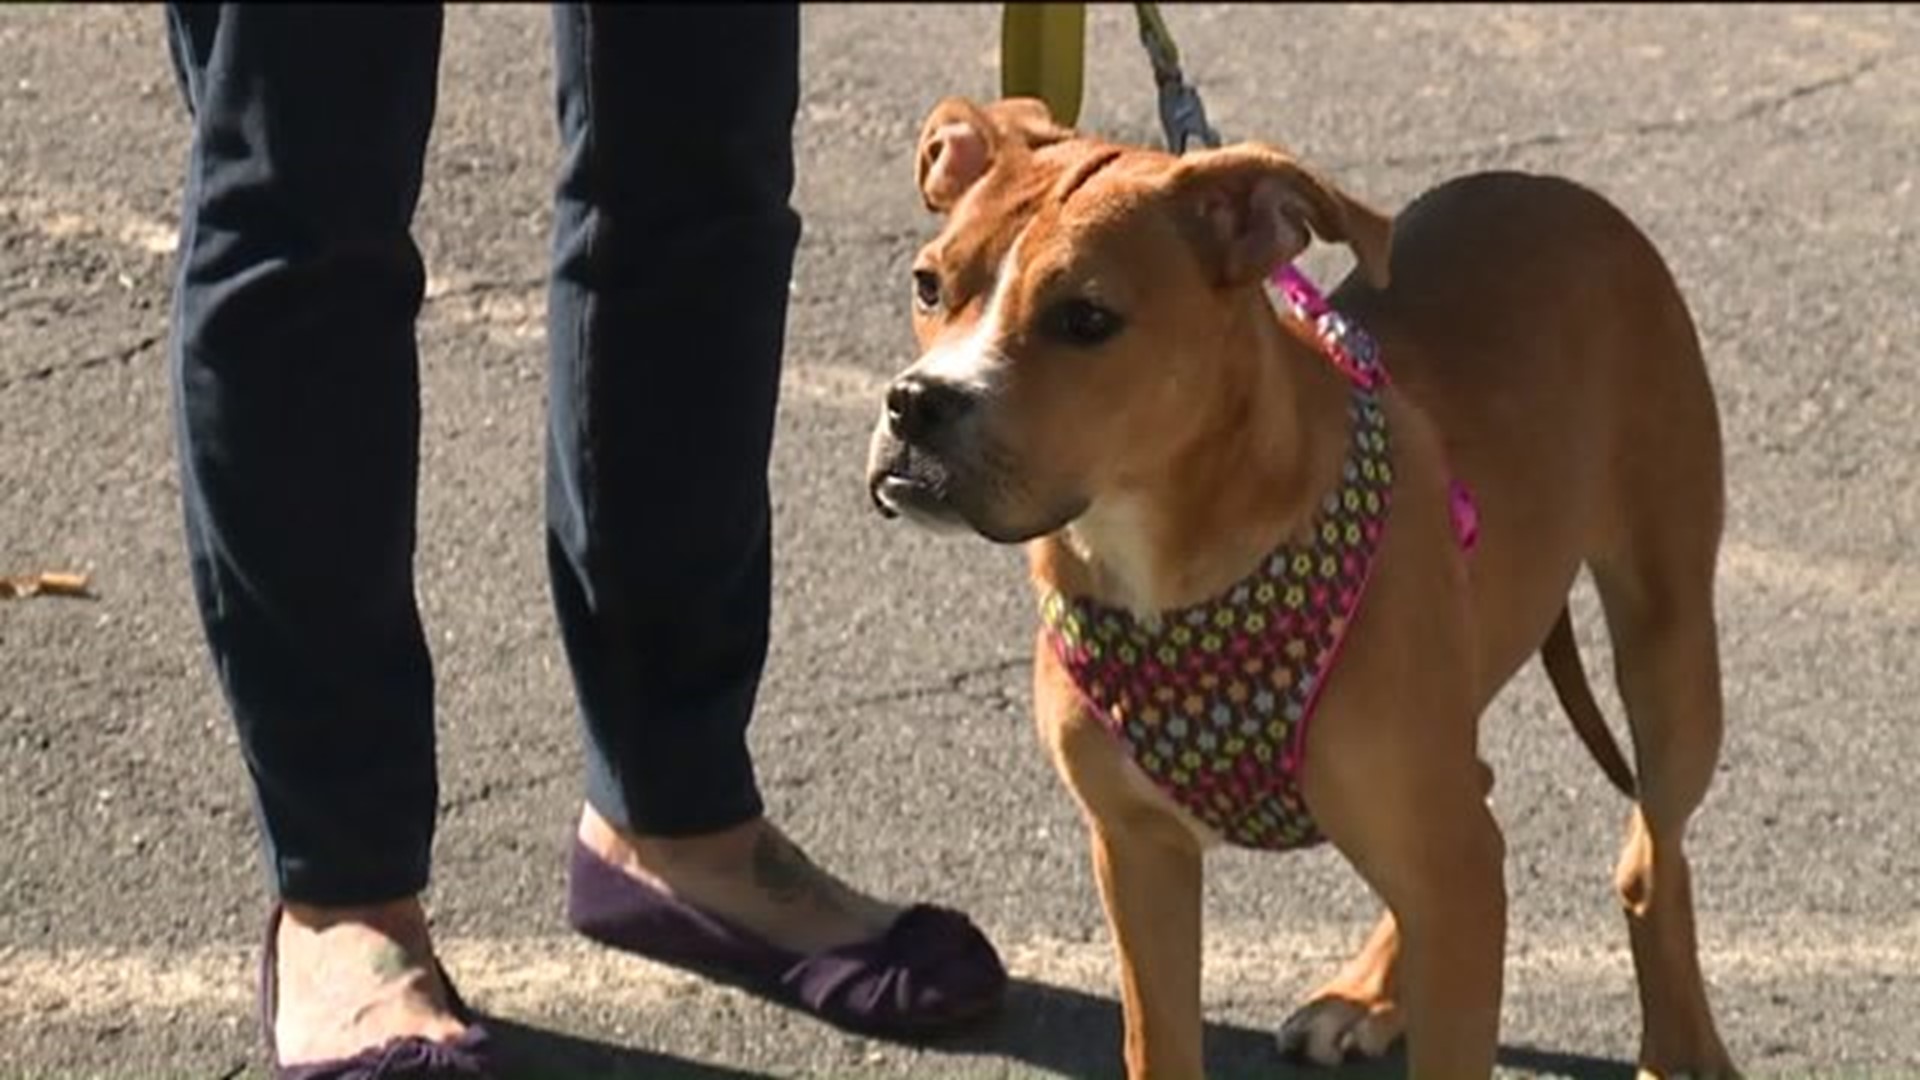 Boxer Mix Expected to Make Full Recovery